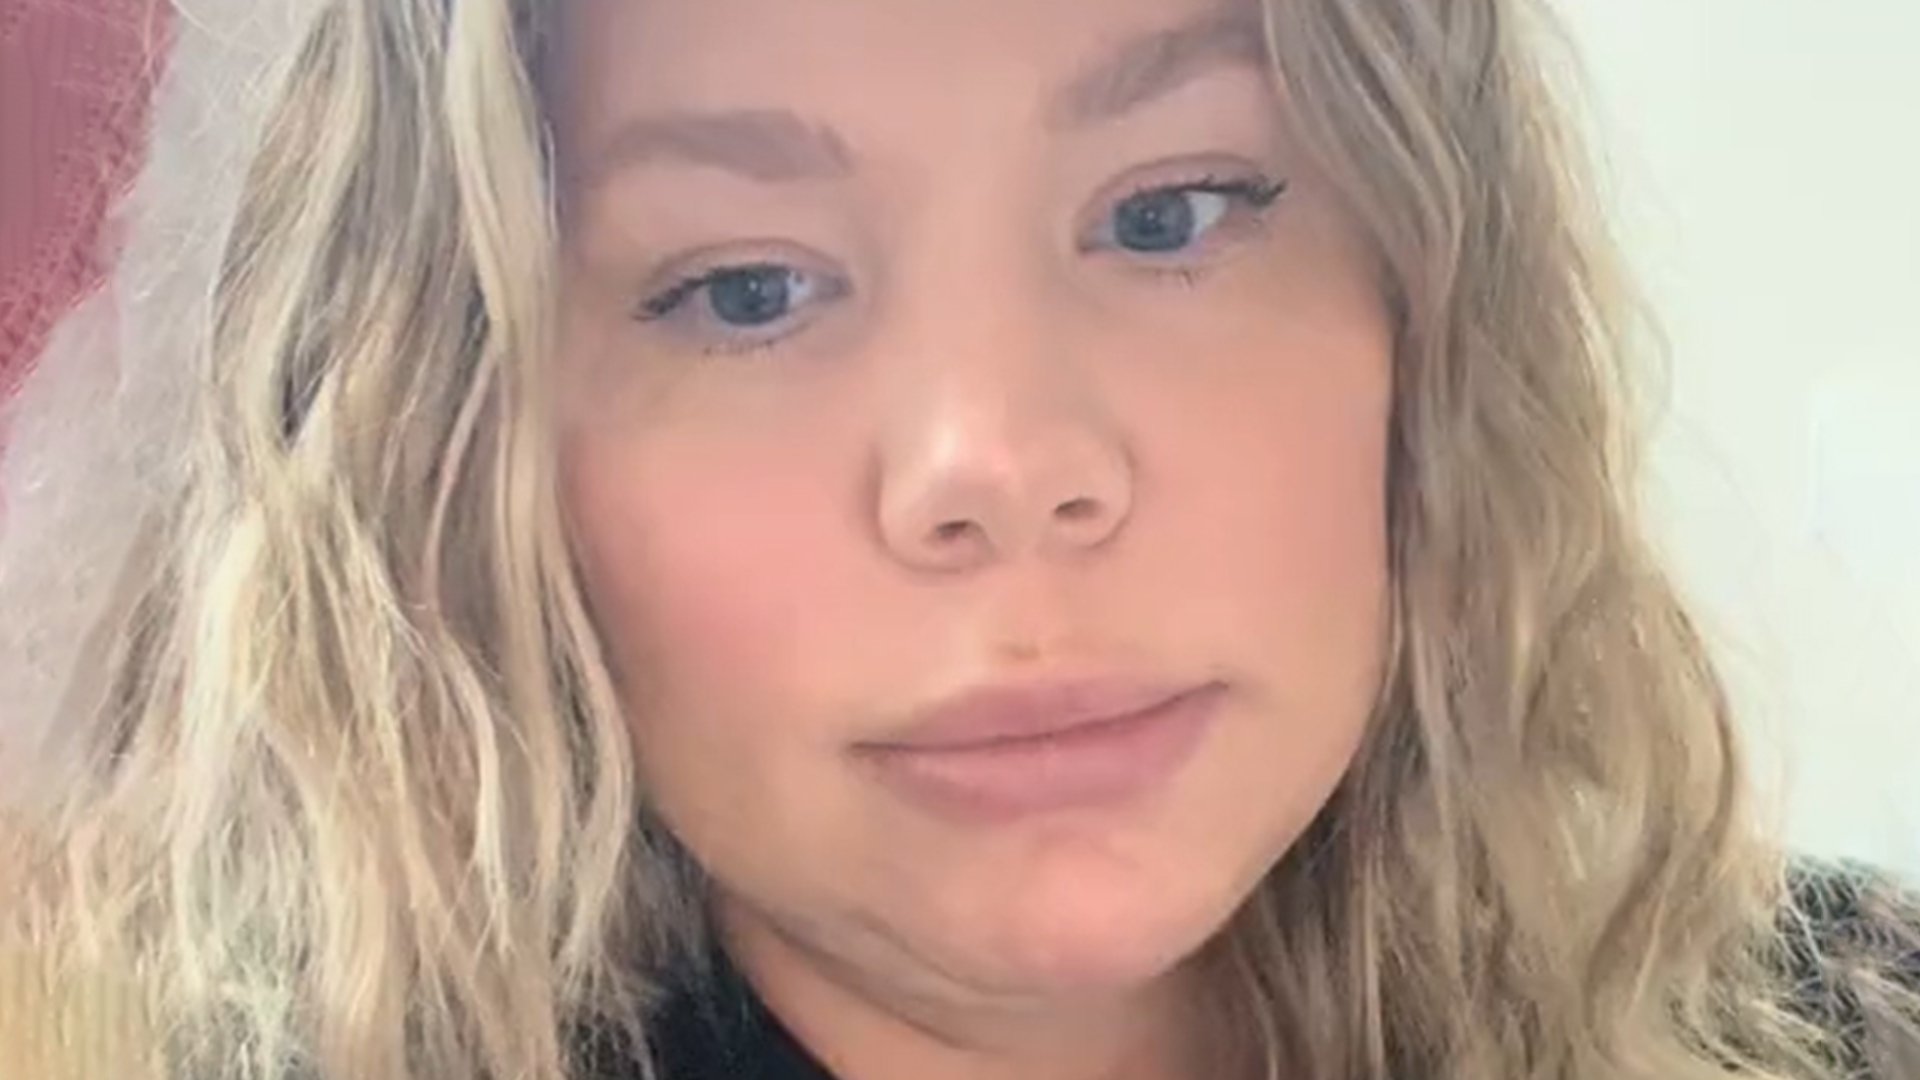 Teen Mom Kailyn Lowry flaunts her real post-baby body in skintight pants and matching top after giving birth to twins